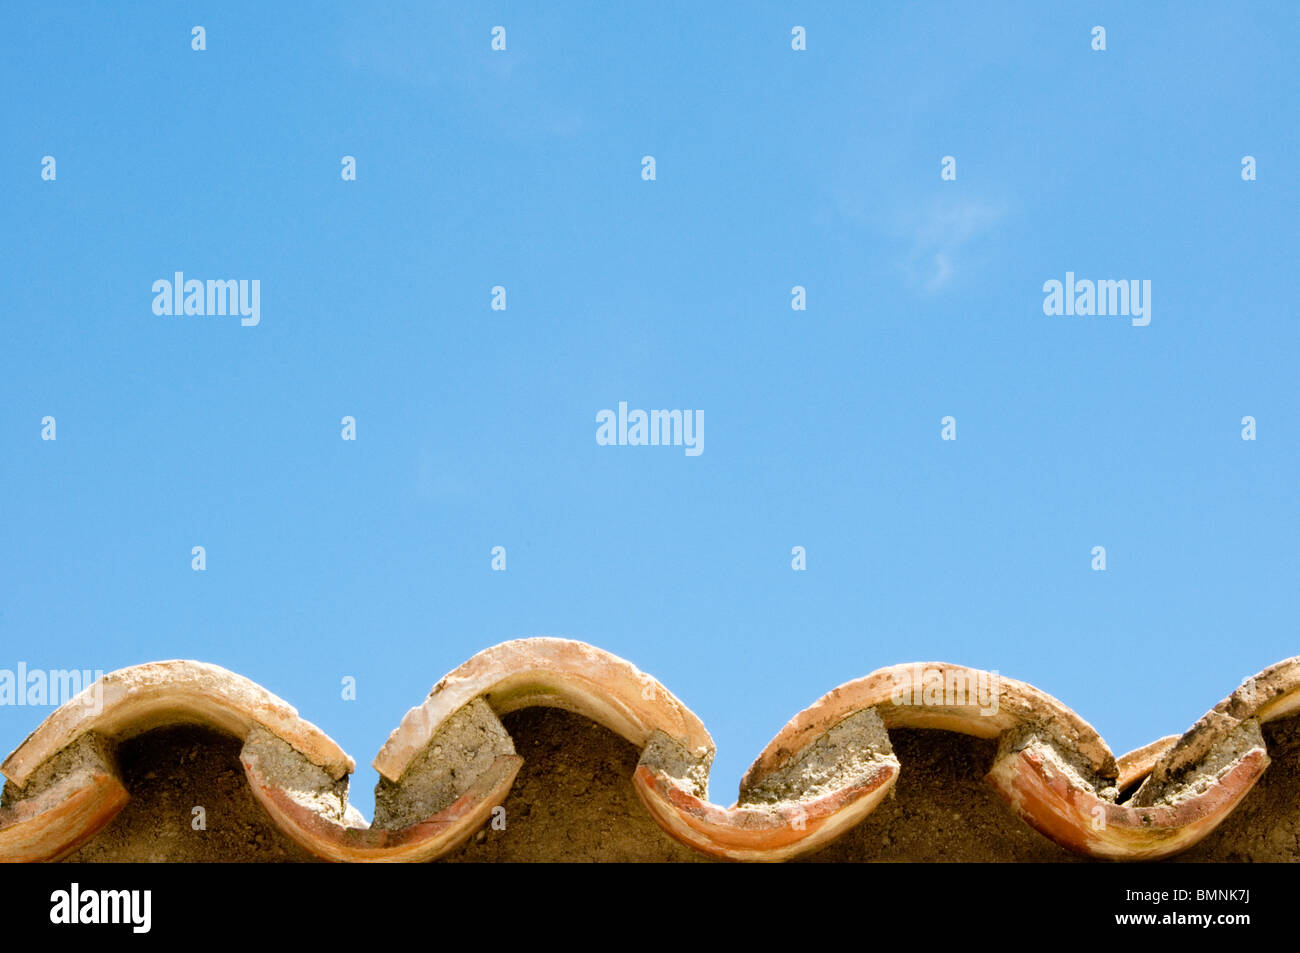 Clay roof tiles against a bright blue sky Stock Photo